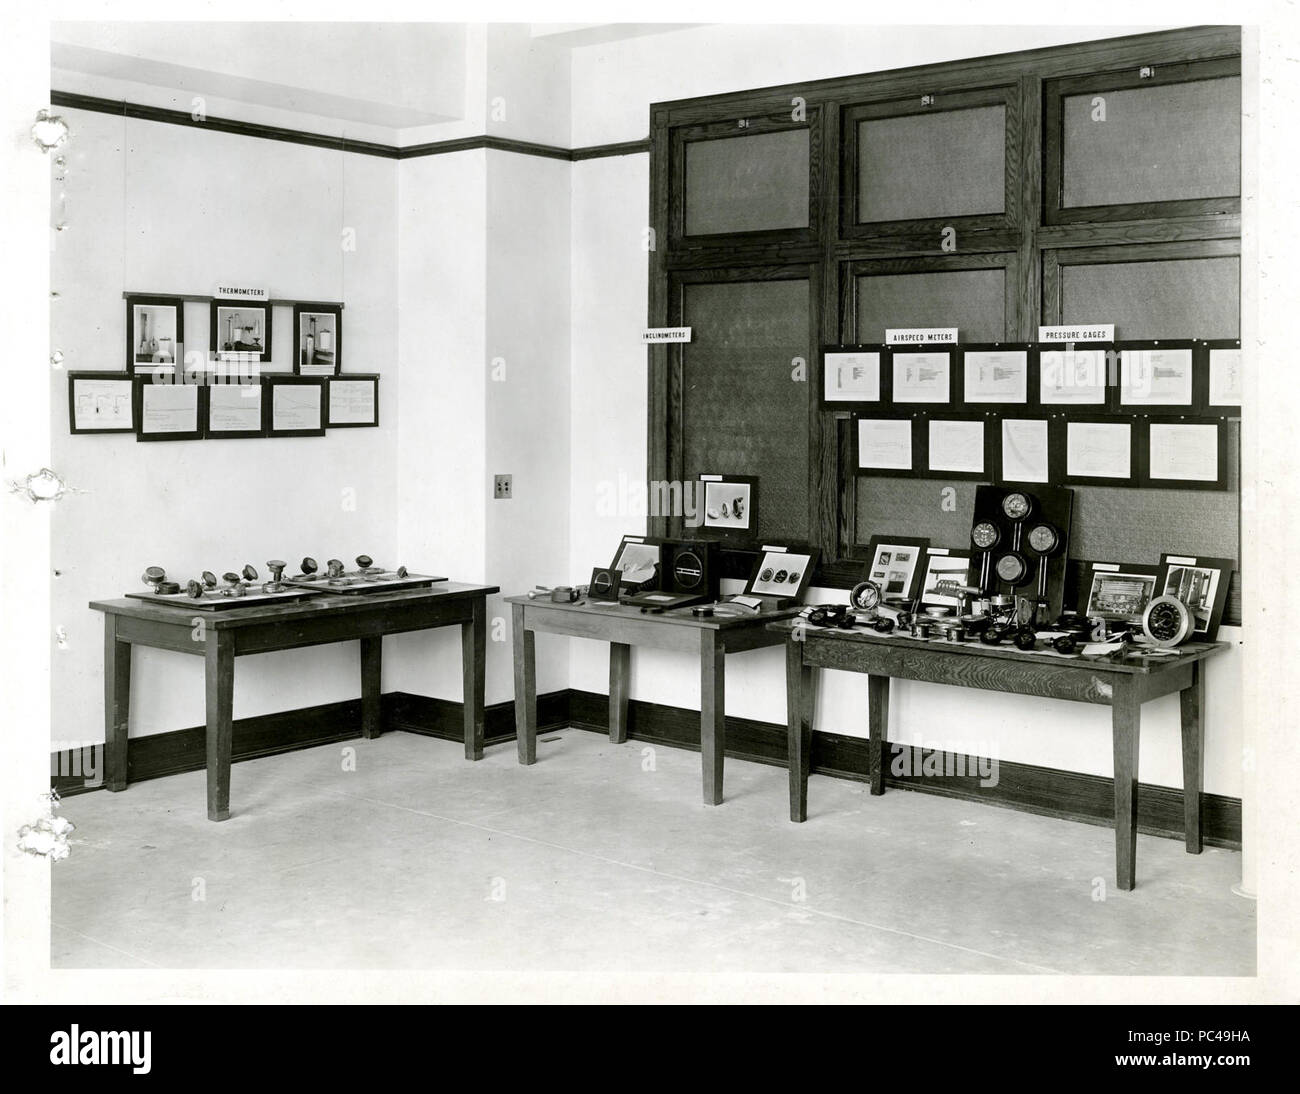 Aeronautic instrument exhibit of thermometers, inclinometers, airspeed meters, and pressure gages at A.P.S., May 1919. Stock Photo